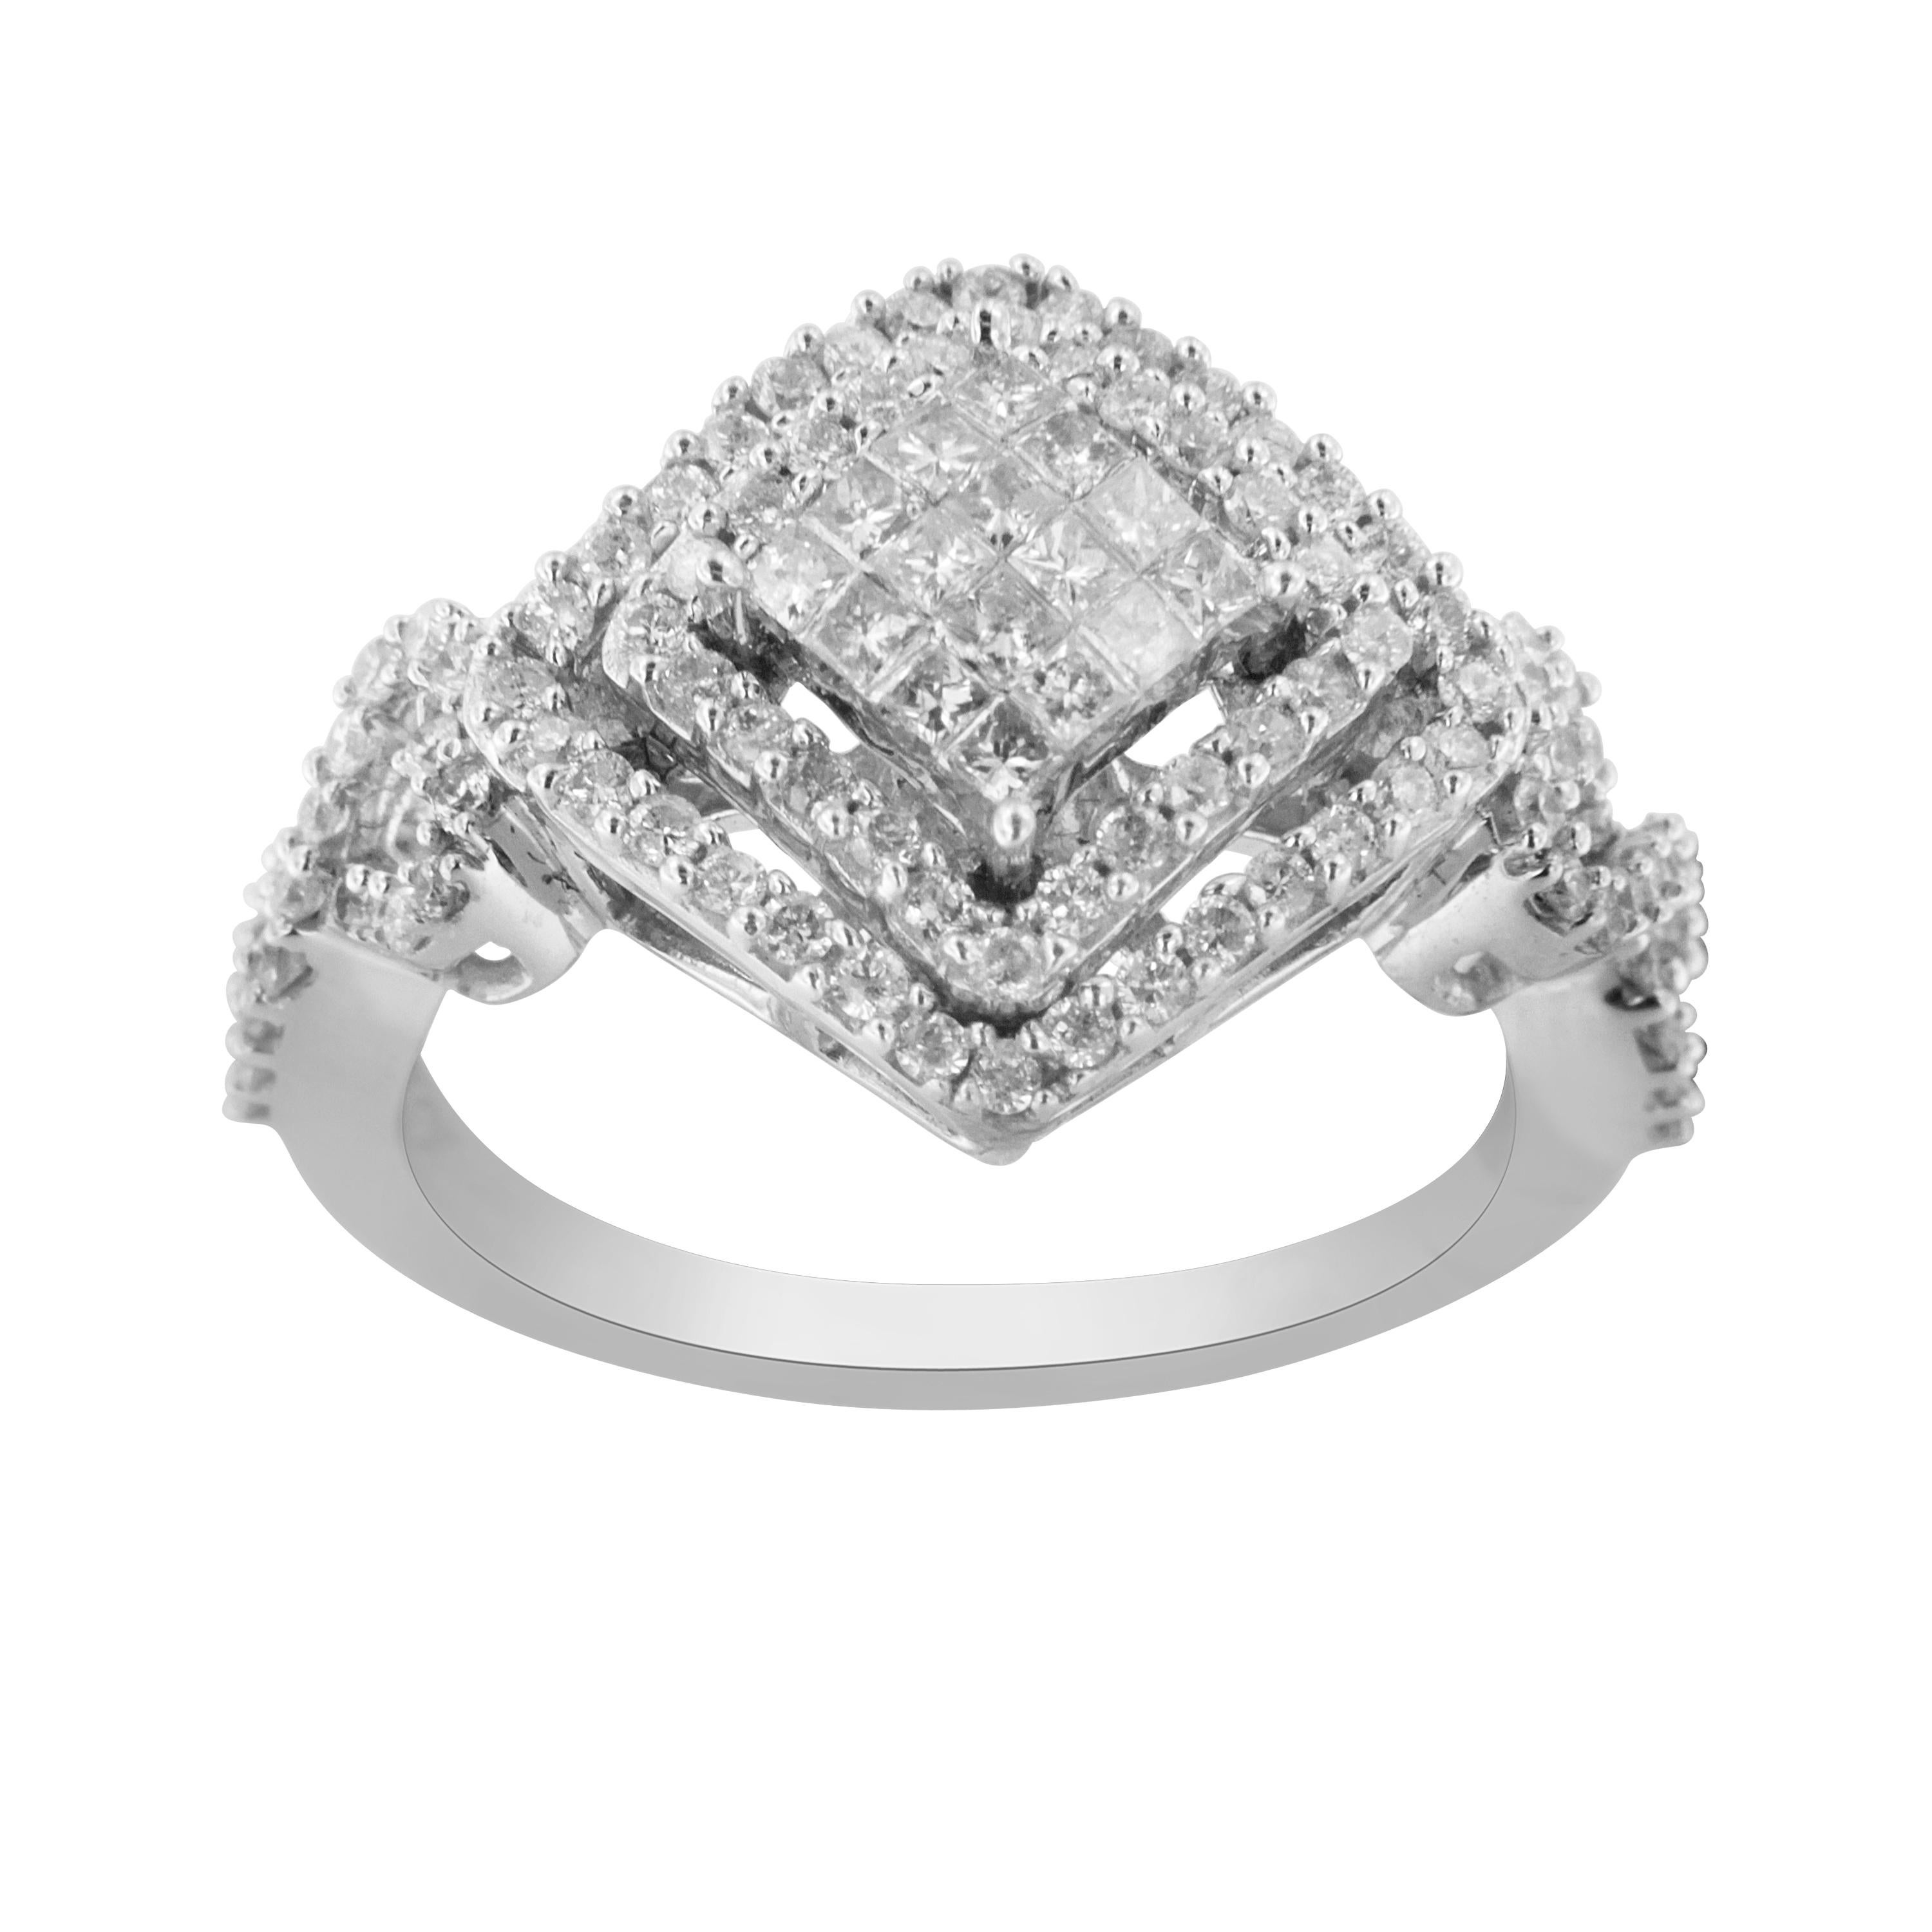 Contemporary 14K White Gold 1.0 Carat Diamond Composite Ring For Sale